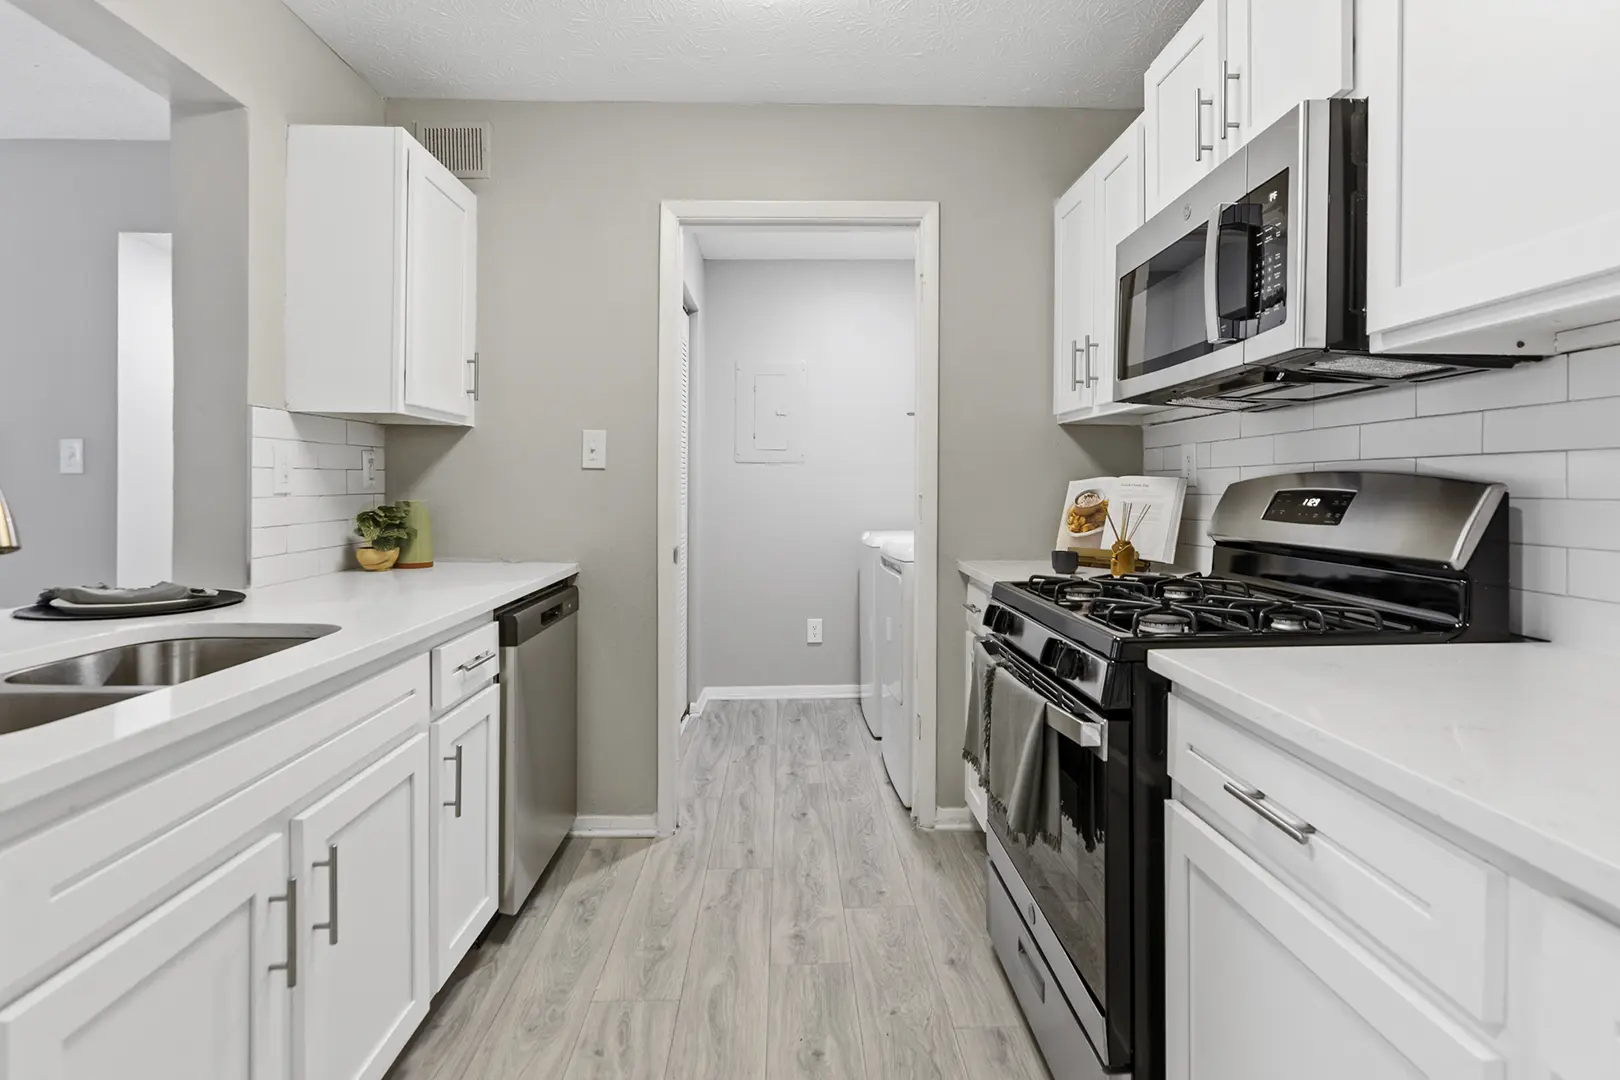 newly renovated kitchen with hardwood finish flooring open to laundry room